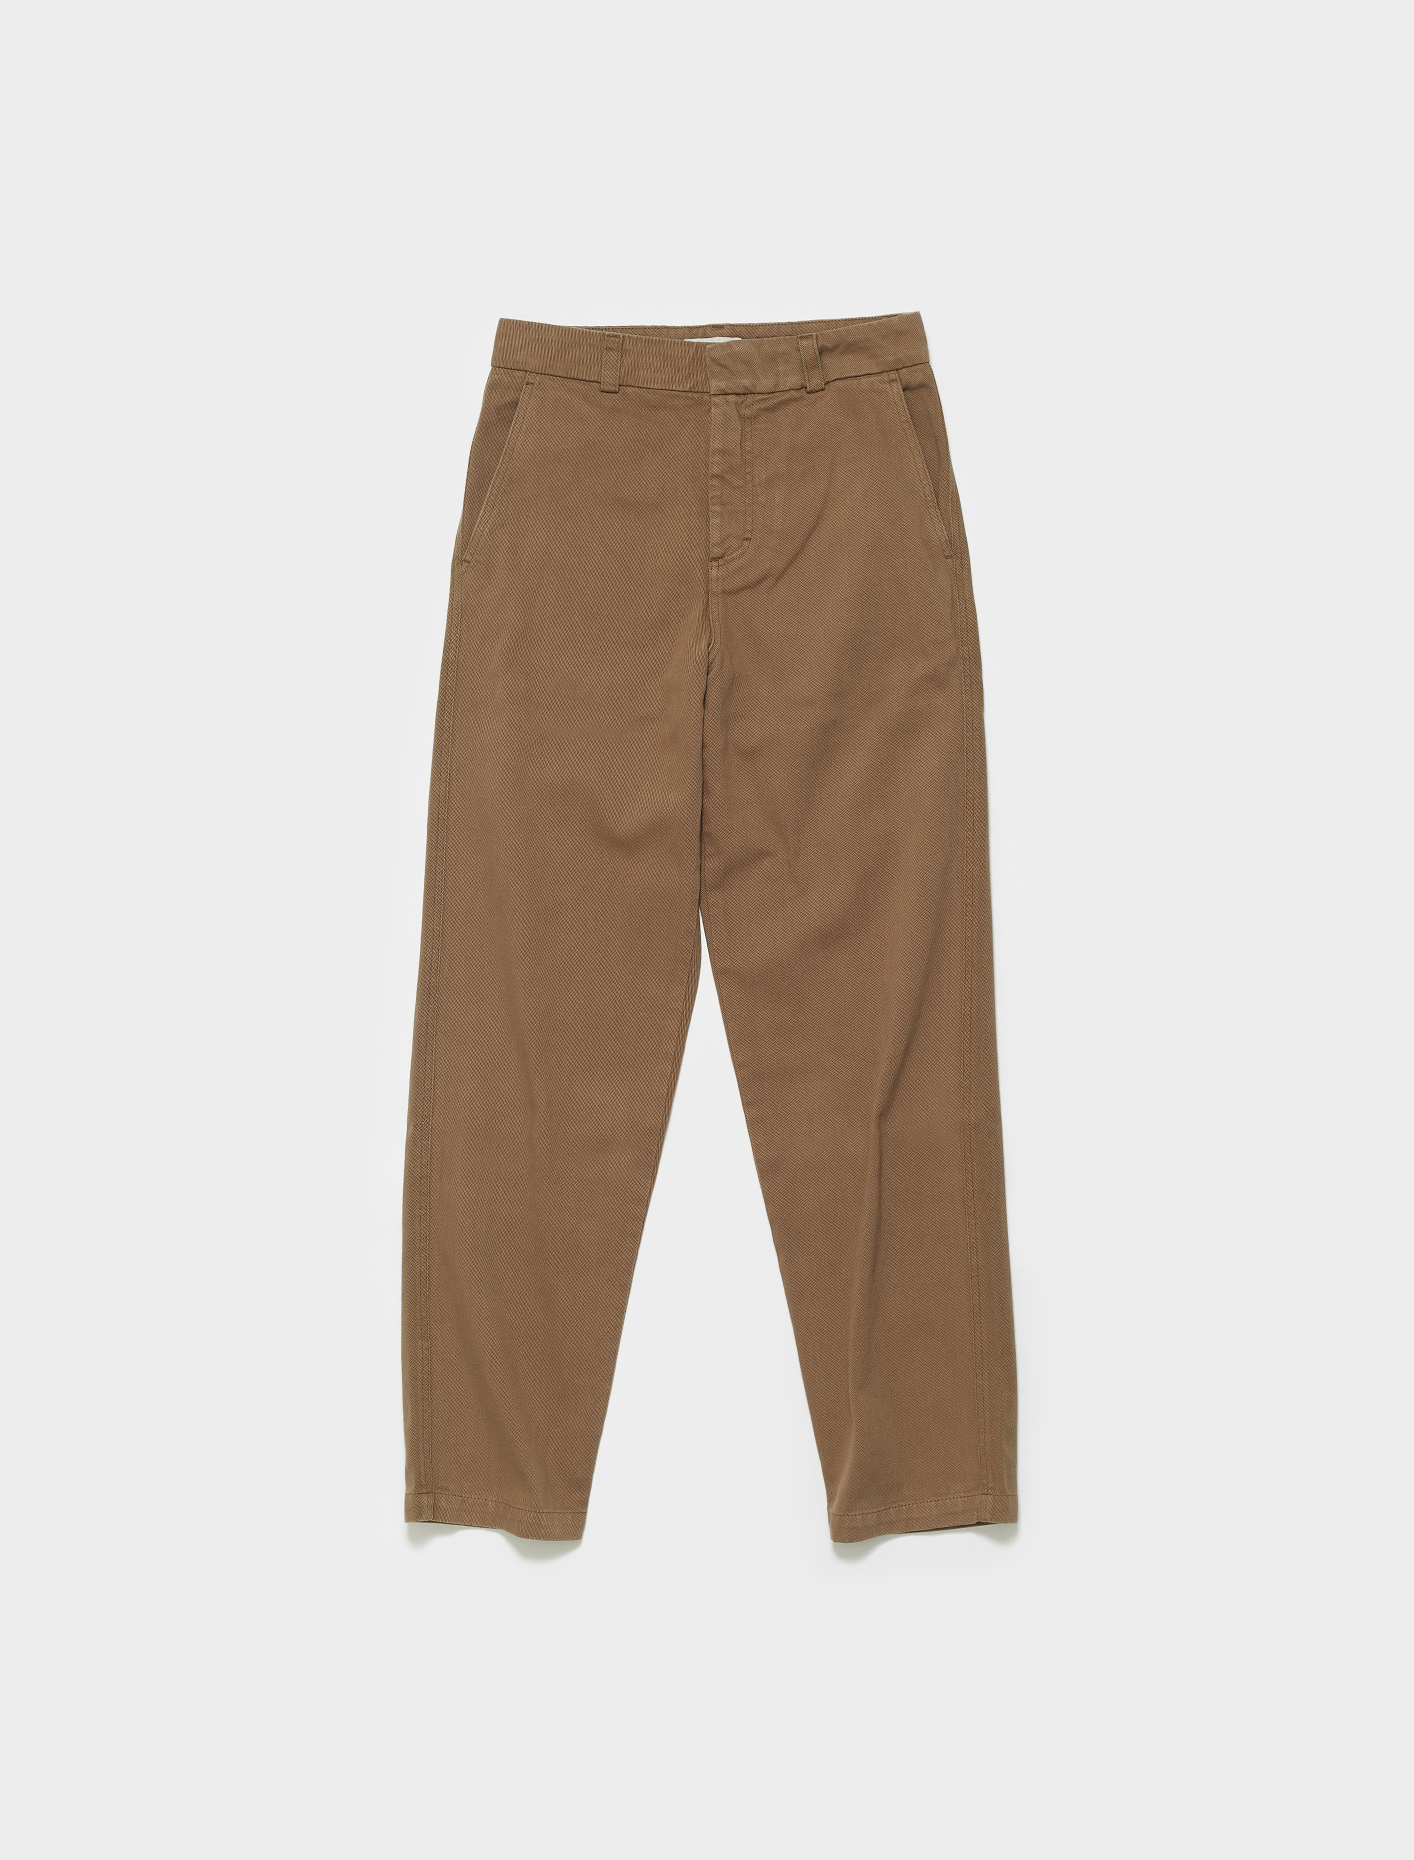 ANOTHER ASPECT ANOTHER Trouser 2.0 in Teak | Voo Store Berlin